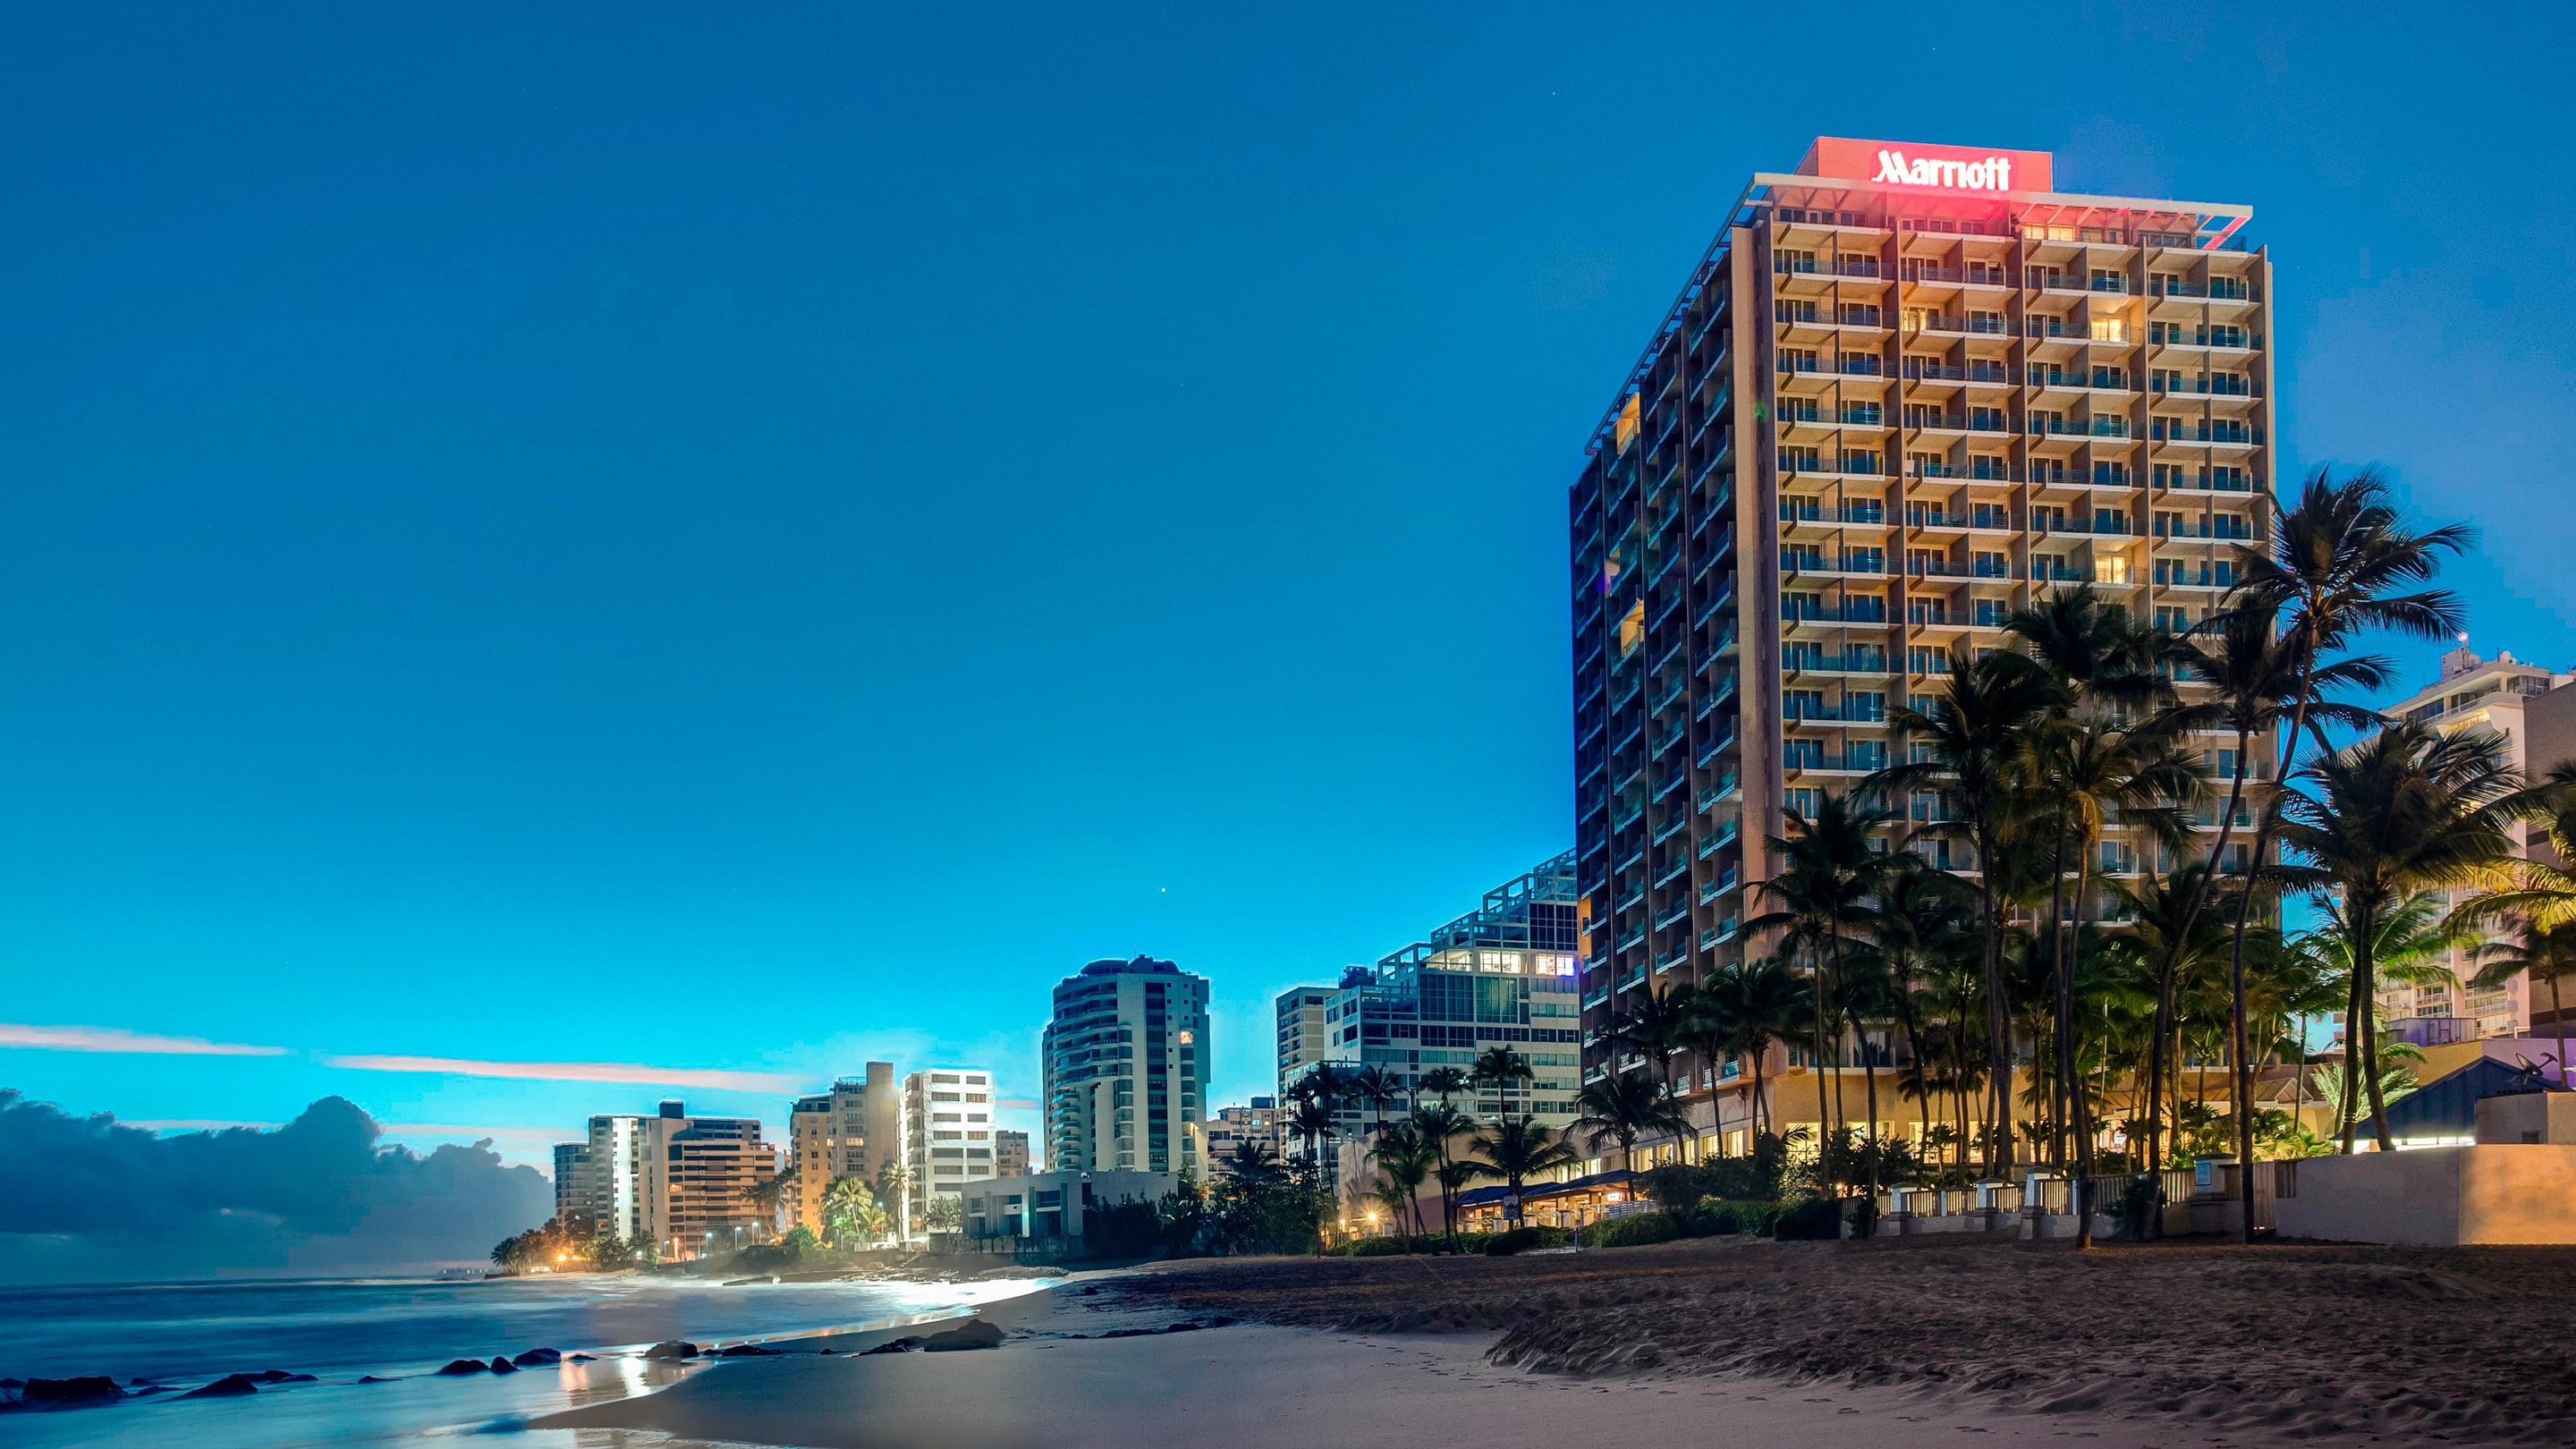 Exterior of hotel and beach at night